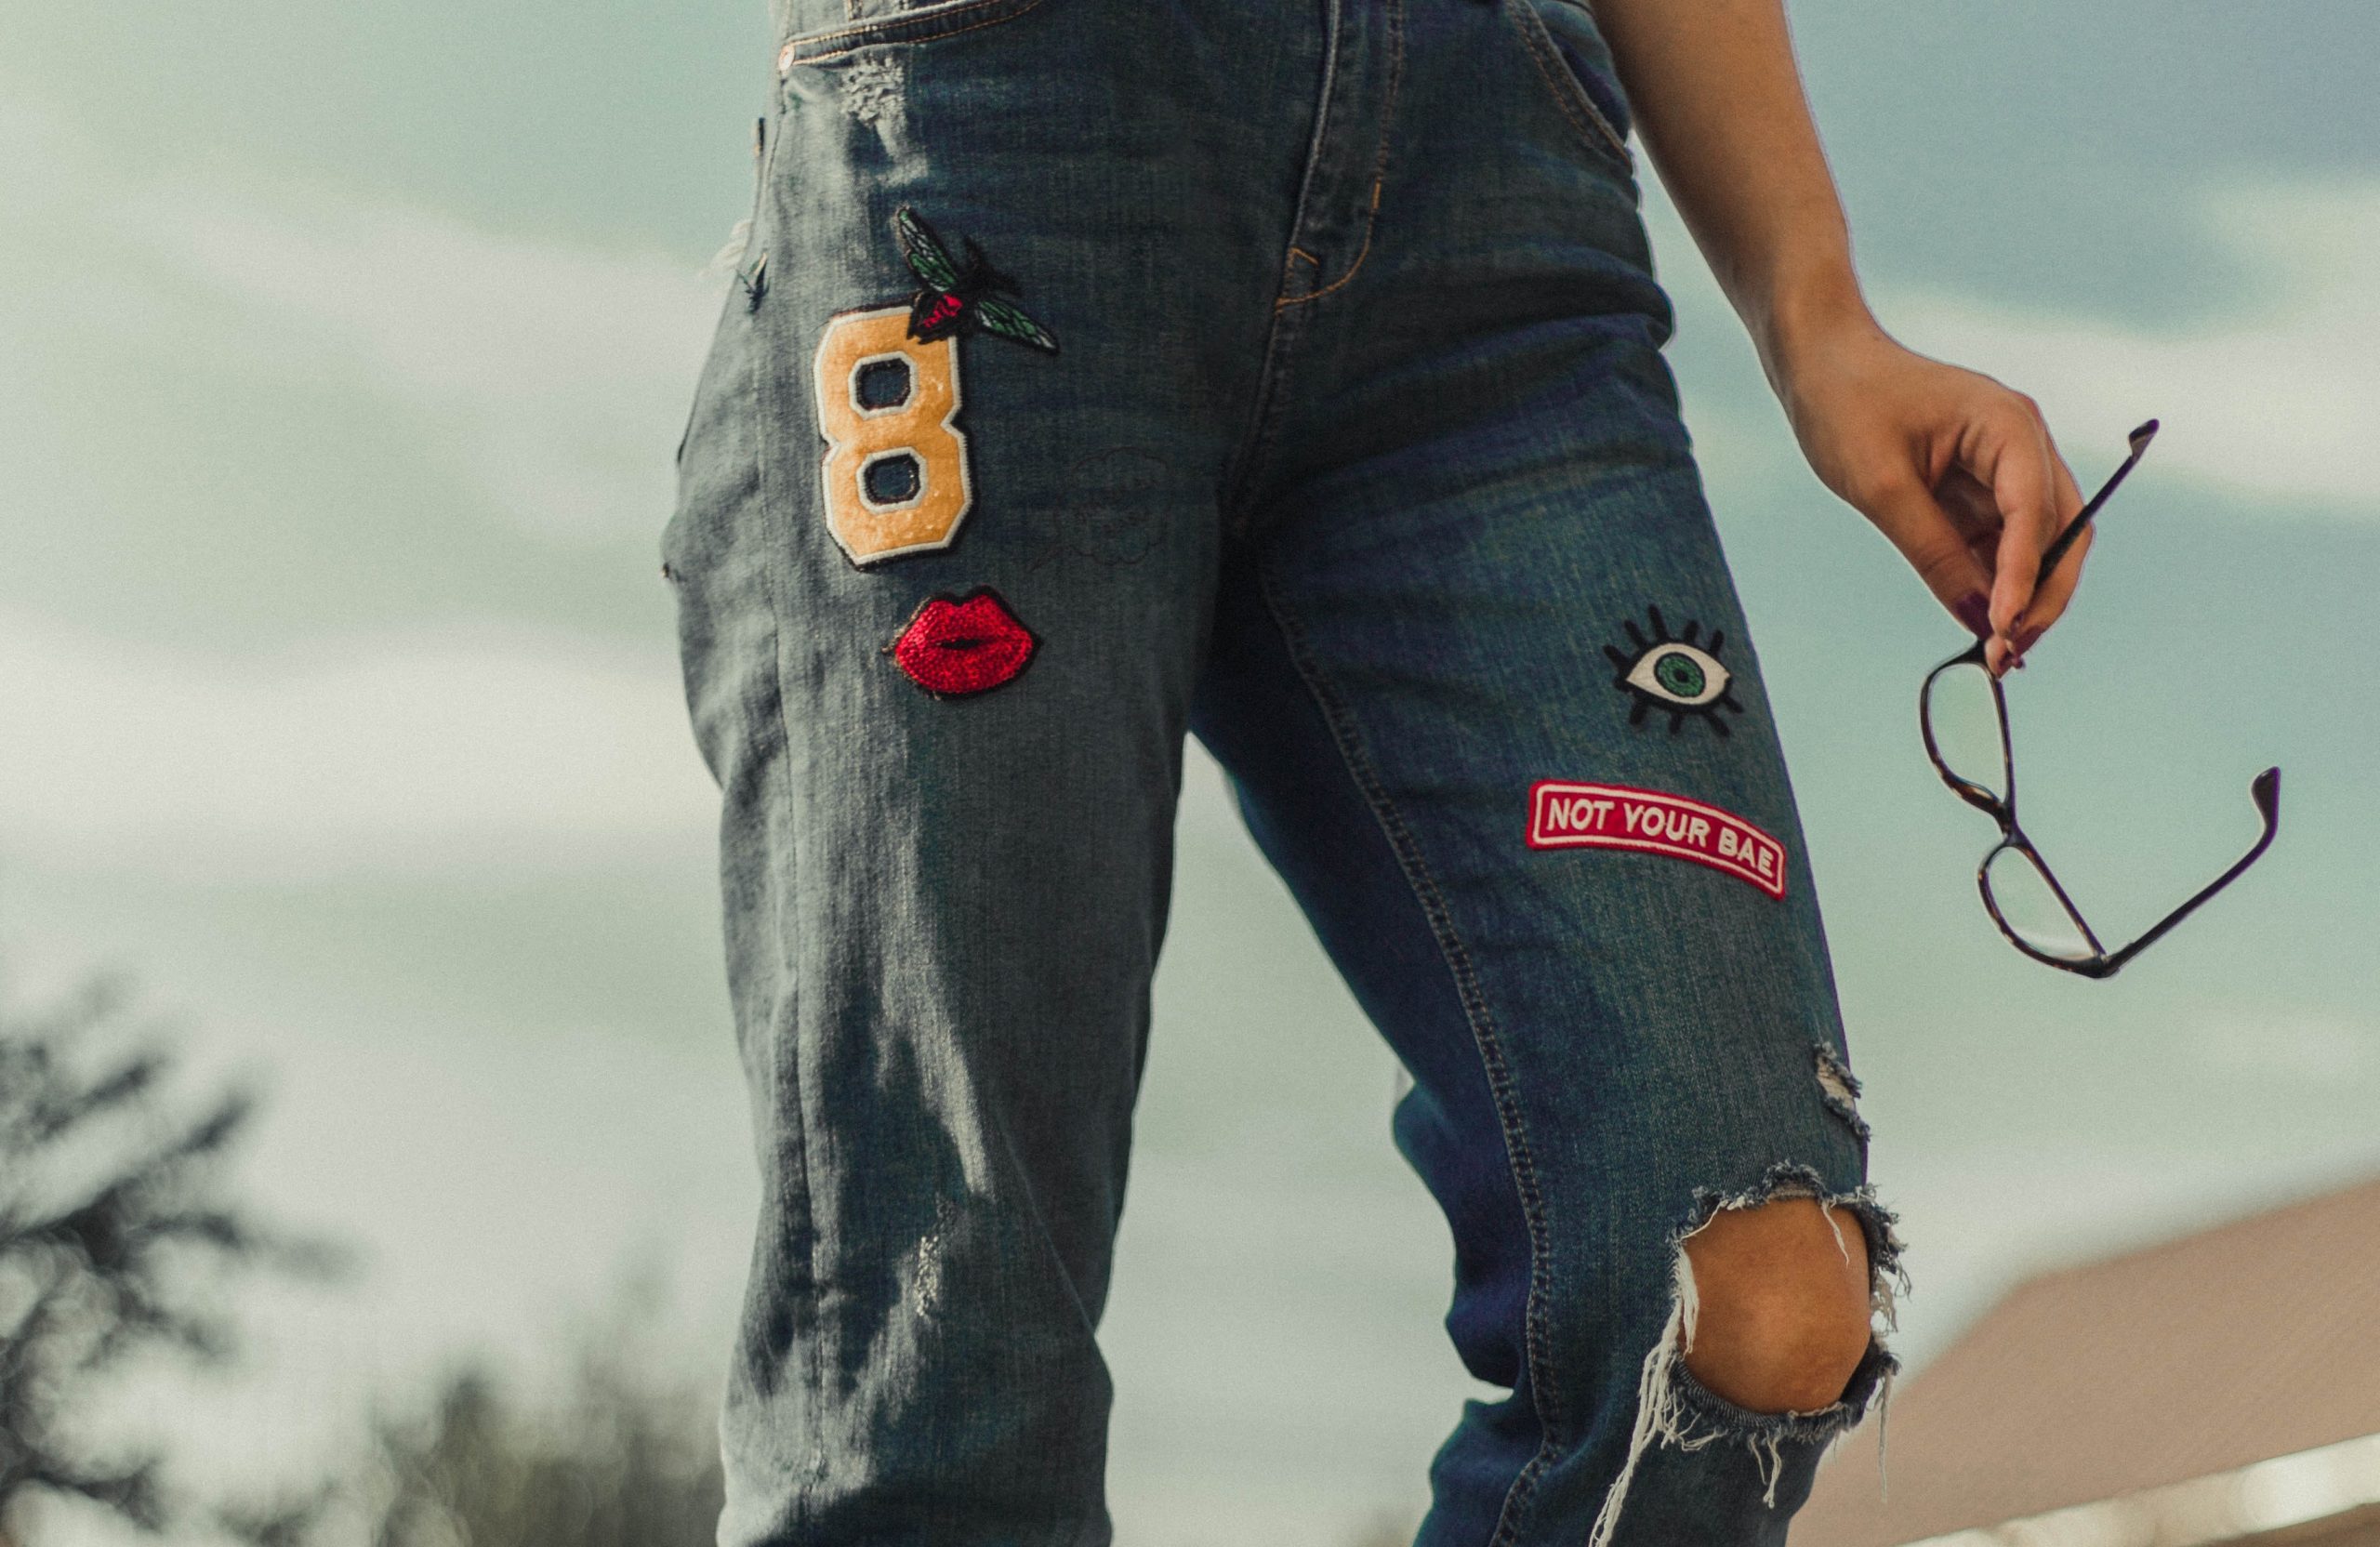 a person wearing a pair of jeans with patches on them.